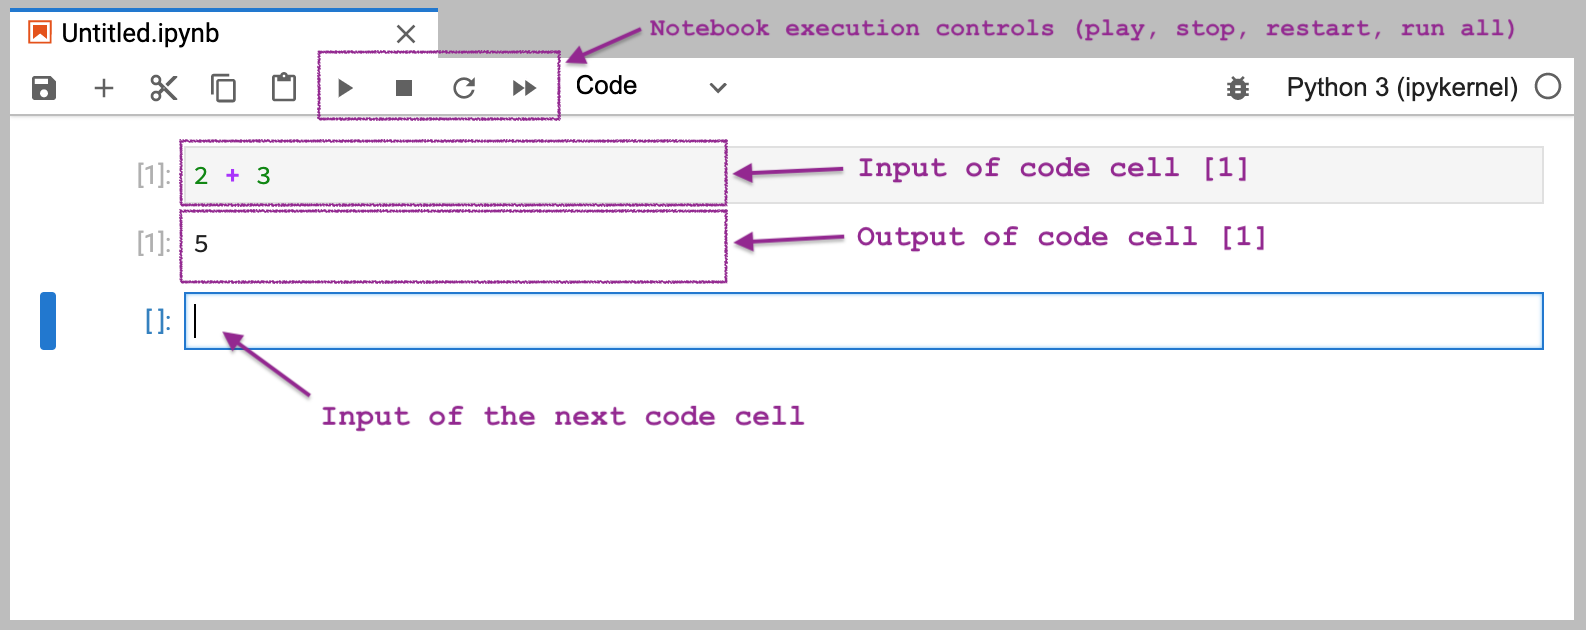 Screenshot showing the contents of Jupyter notebook with labels for the input and output of the first code cell. The screenshot also highlights the notebook execution control buttons: run, stop, restart, and run all.